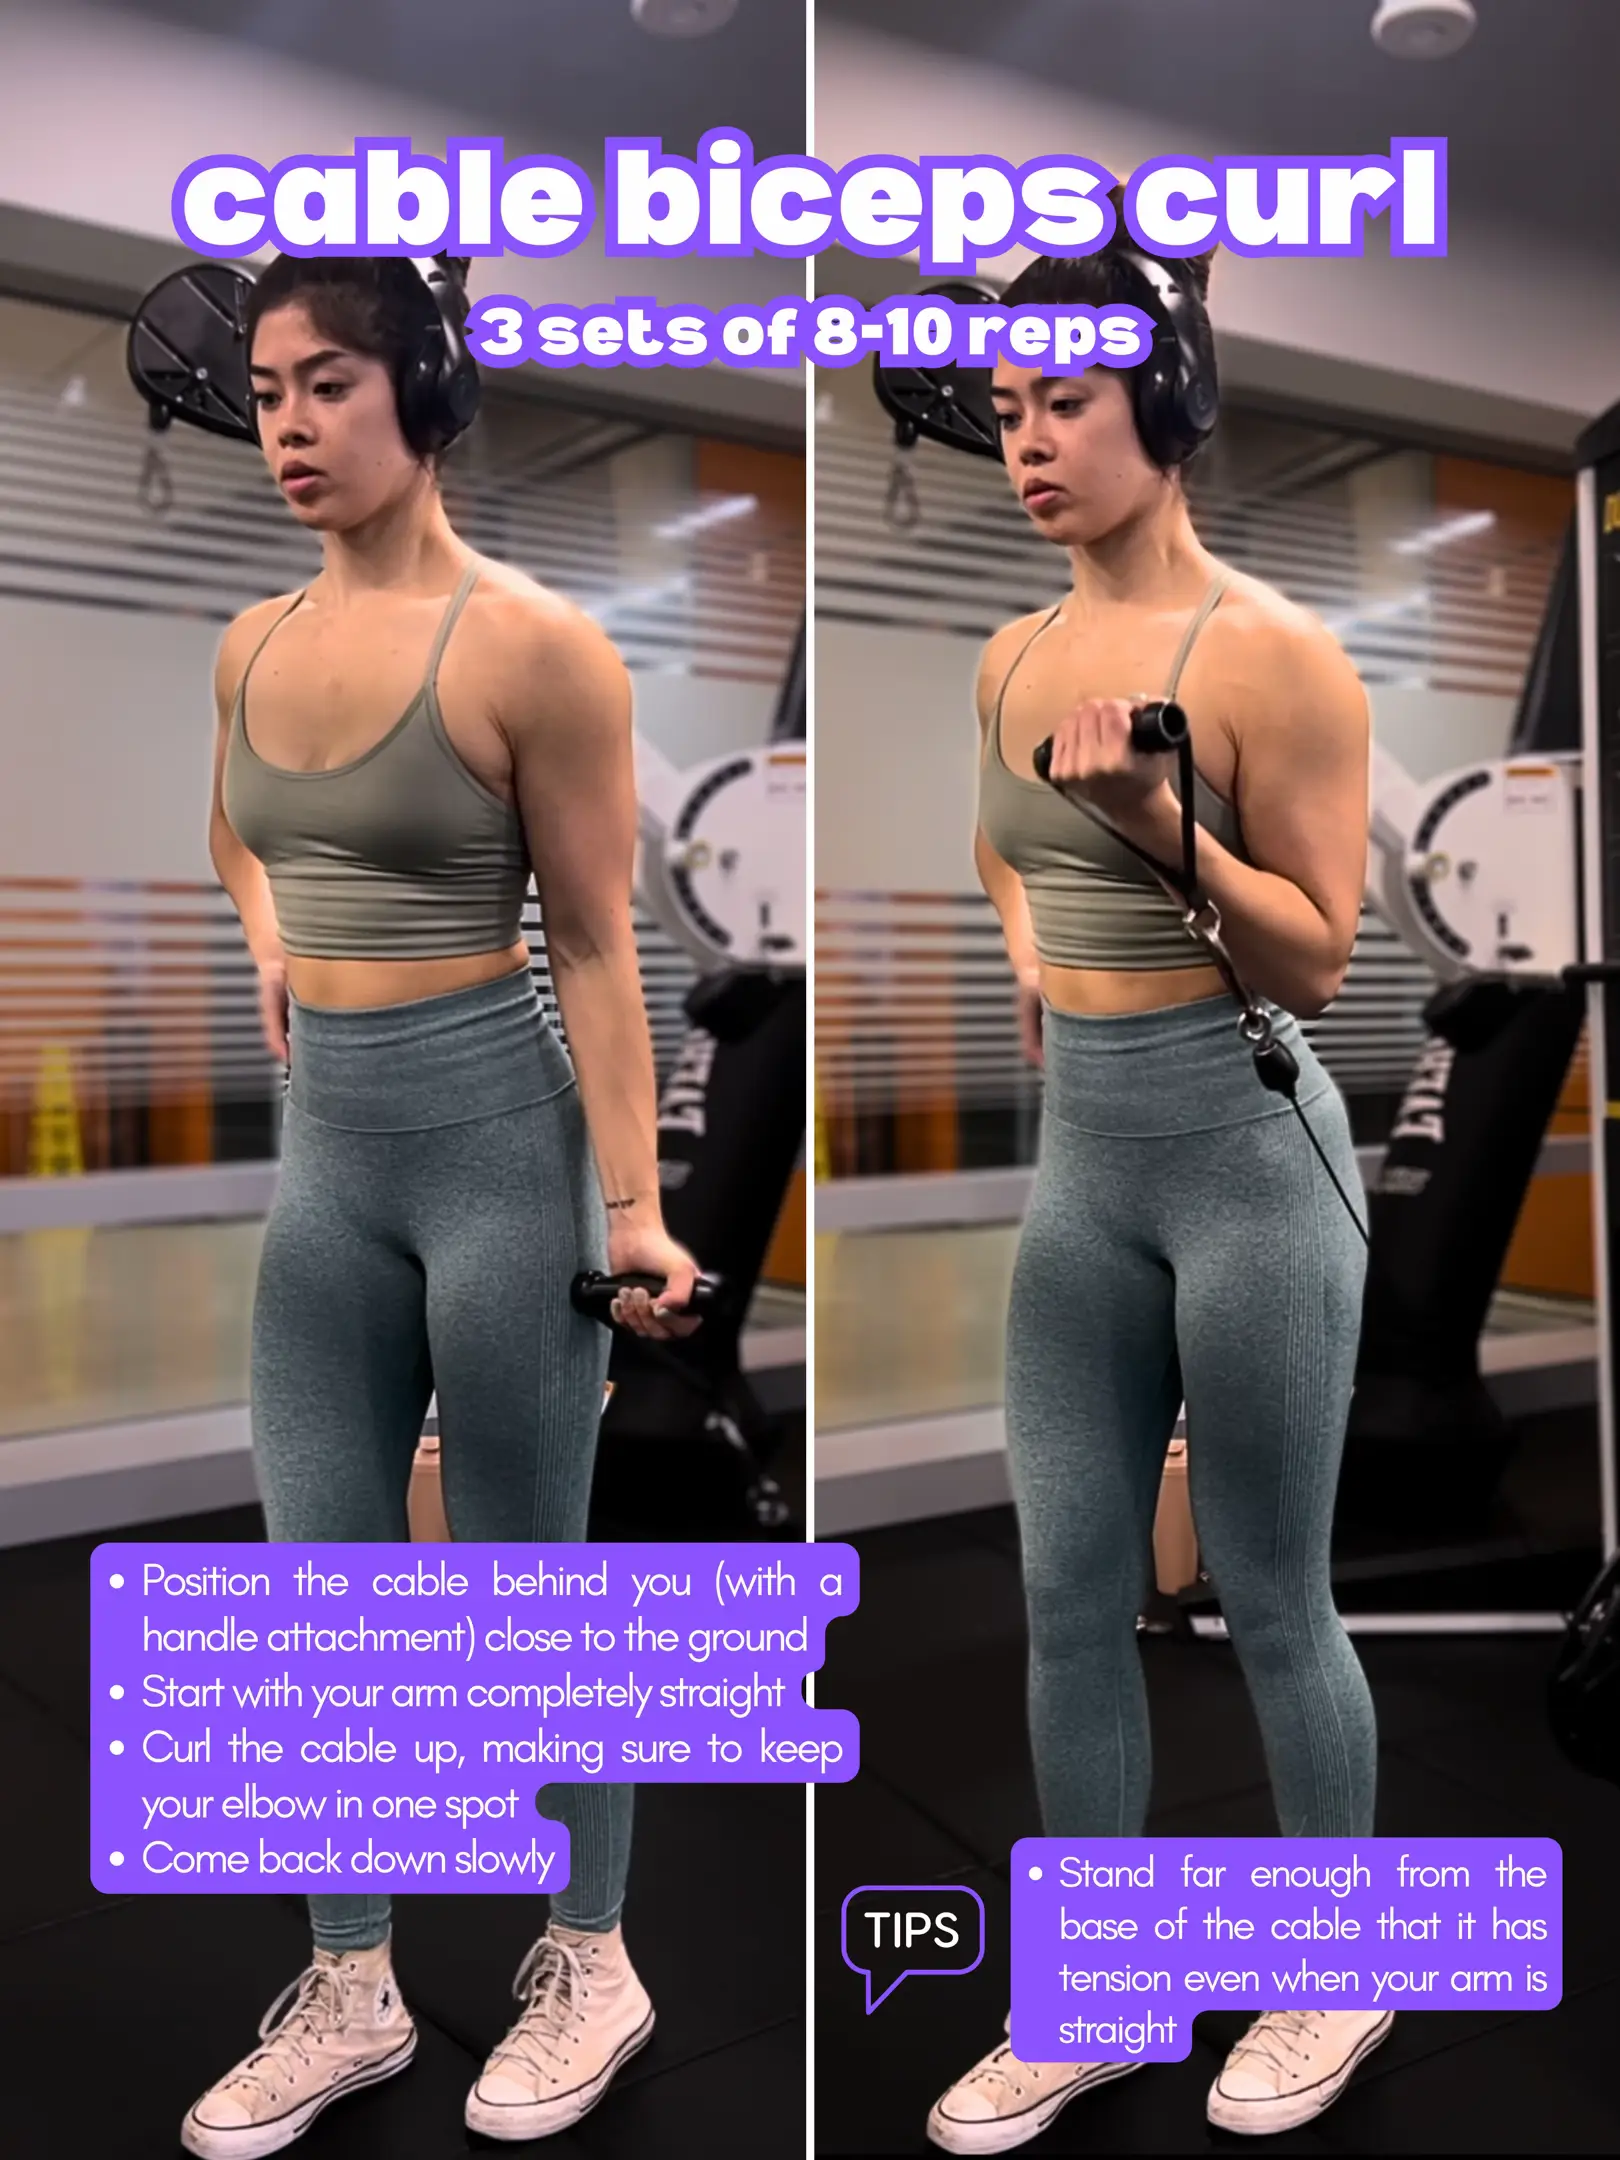 Get toned arms with this workout!